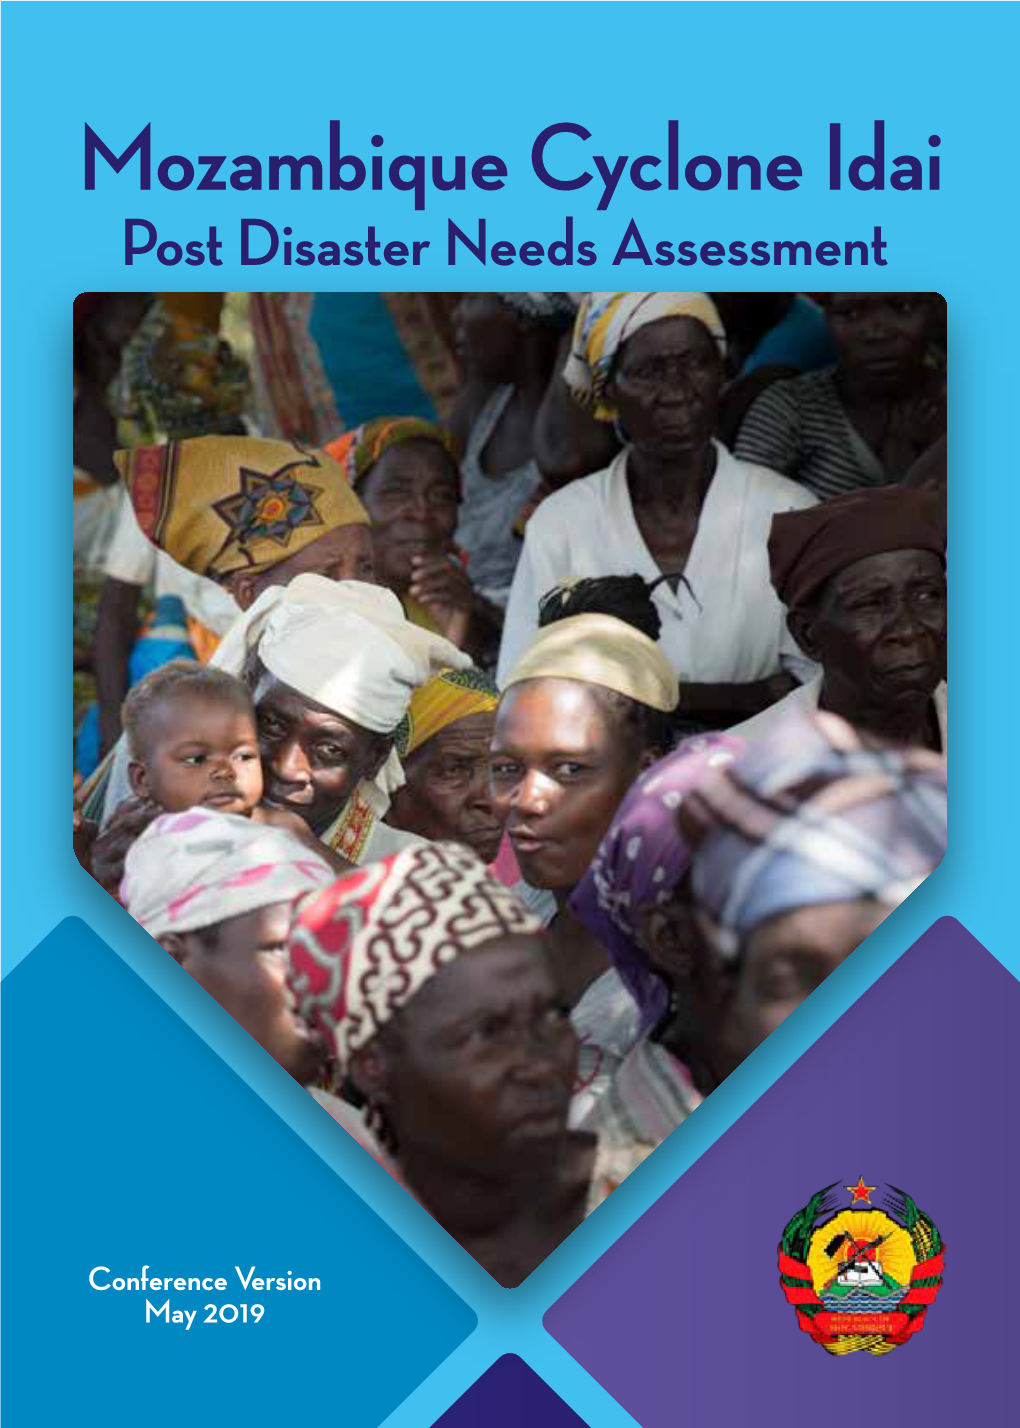 Mozambique Cyclone Idai Post Disaster Needs Assessment